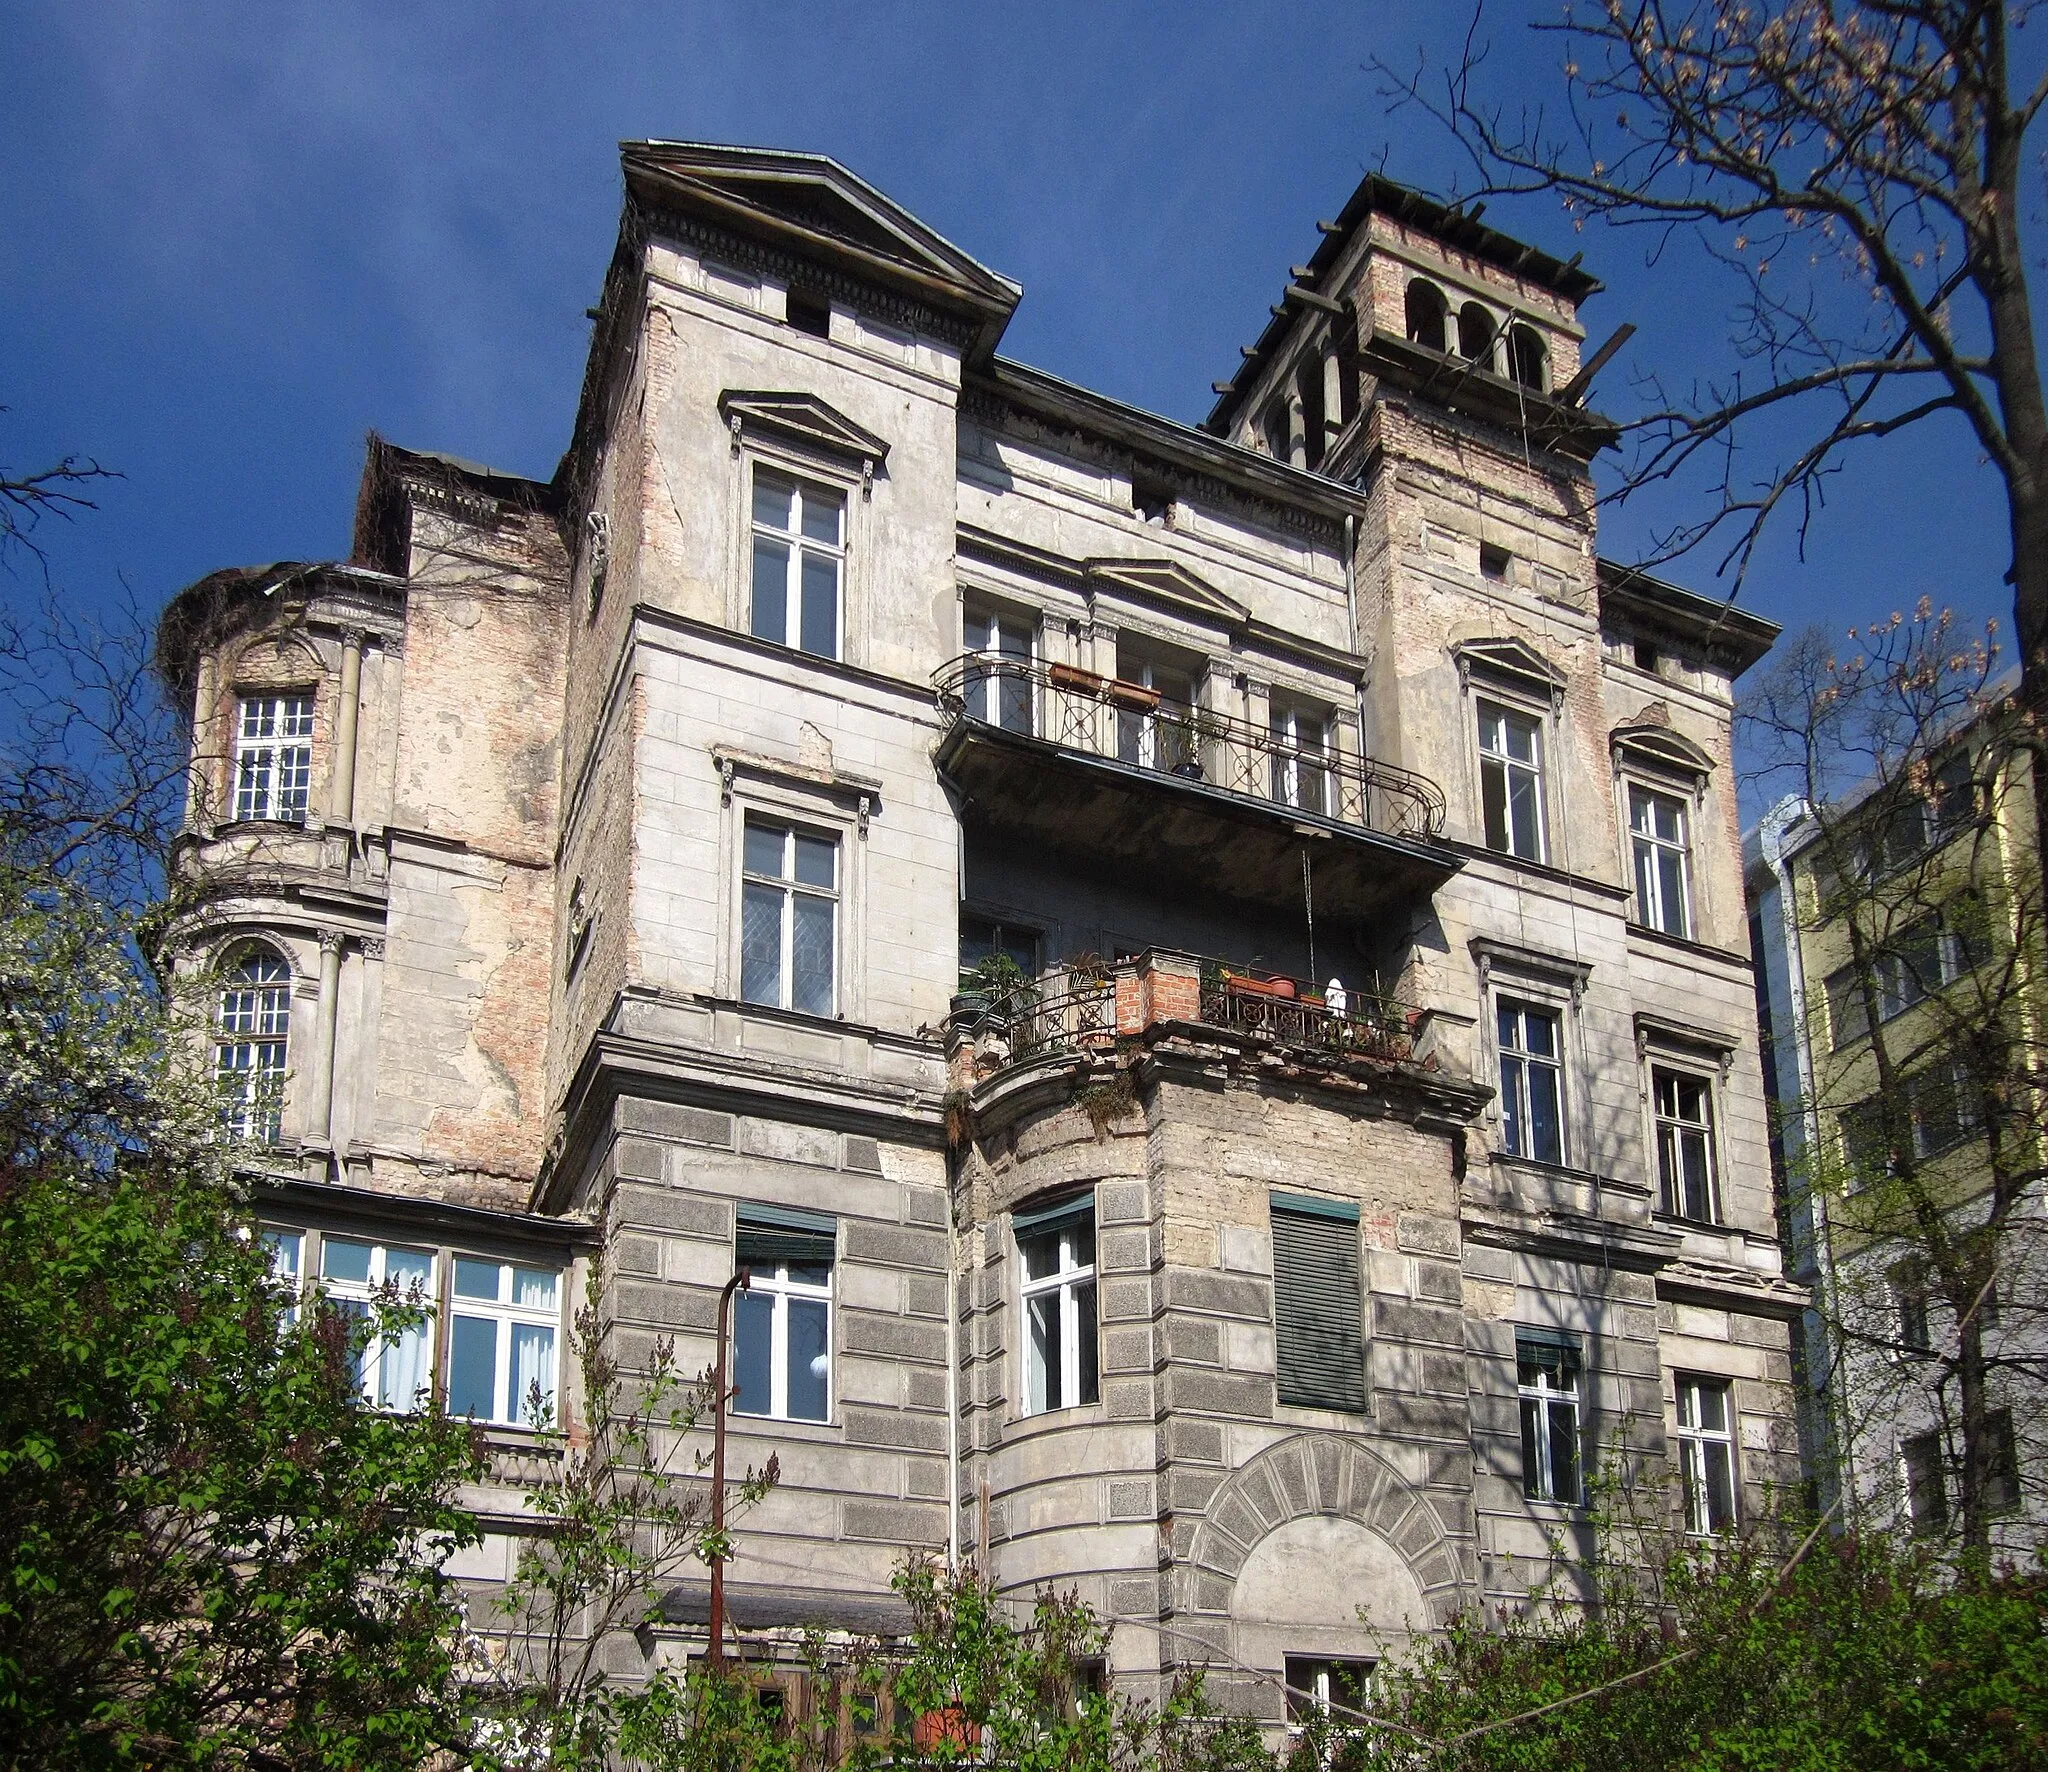 Photo showing: The Haus Lindenberg at Methfesselstraße No. 23/25 in Berlin-Kreuzberg, showing the garden side at the former villa colony Wilhelmshöhe. The house was built in 1874 by Ewald Becher. It has been designated a historic landmark.